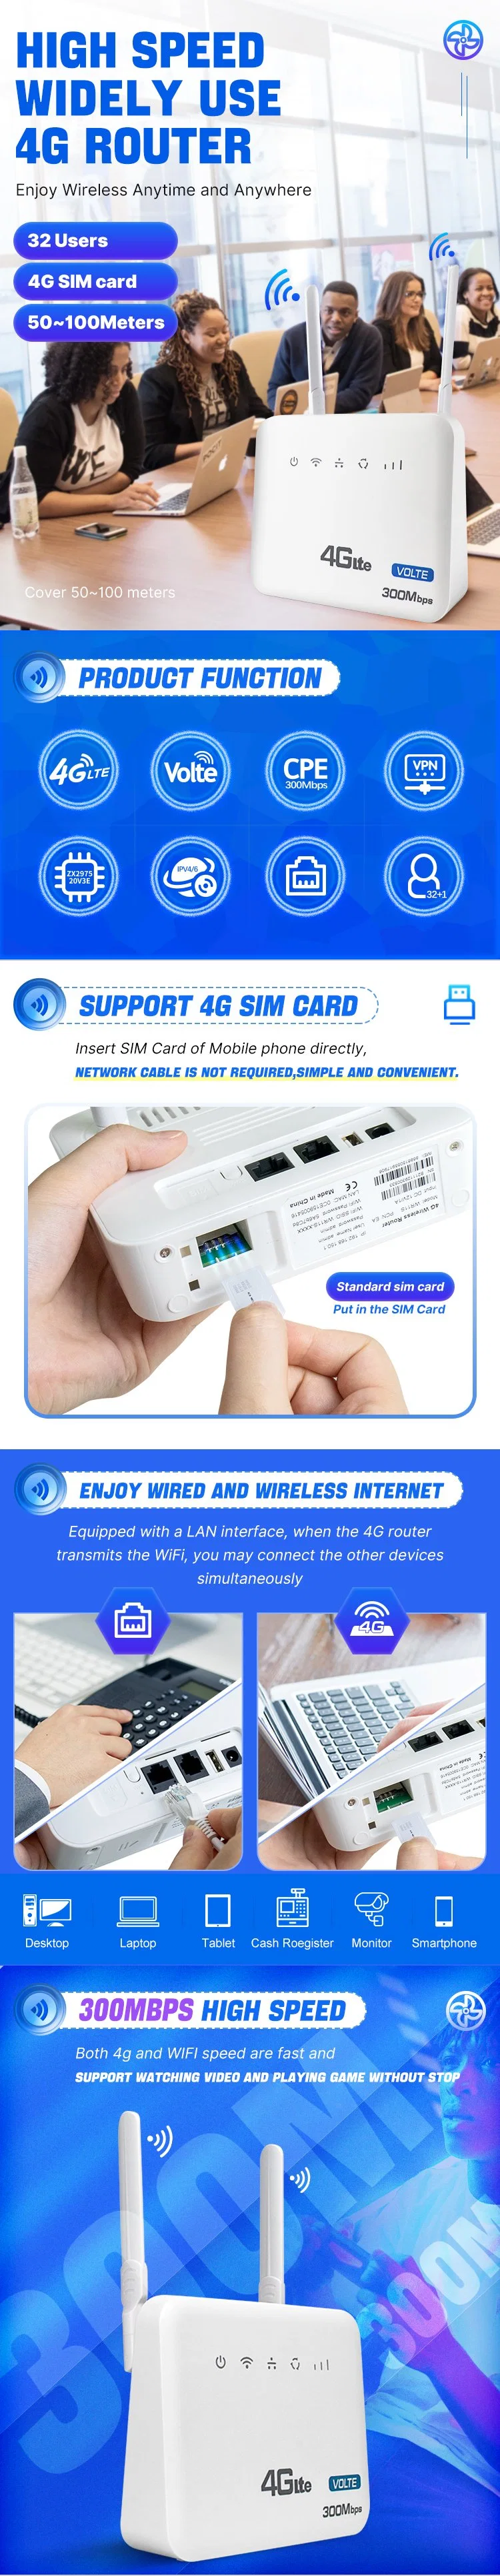 Cheap Outdoor Rj11 Volte VPN 300Mbps Rauter 3G 4G LTE CPE WiFi Wireless Router with SIM Card Slot